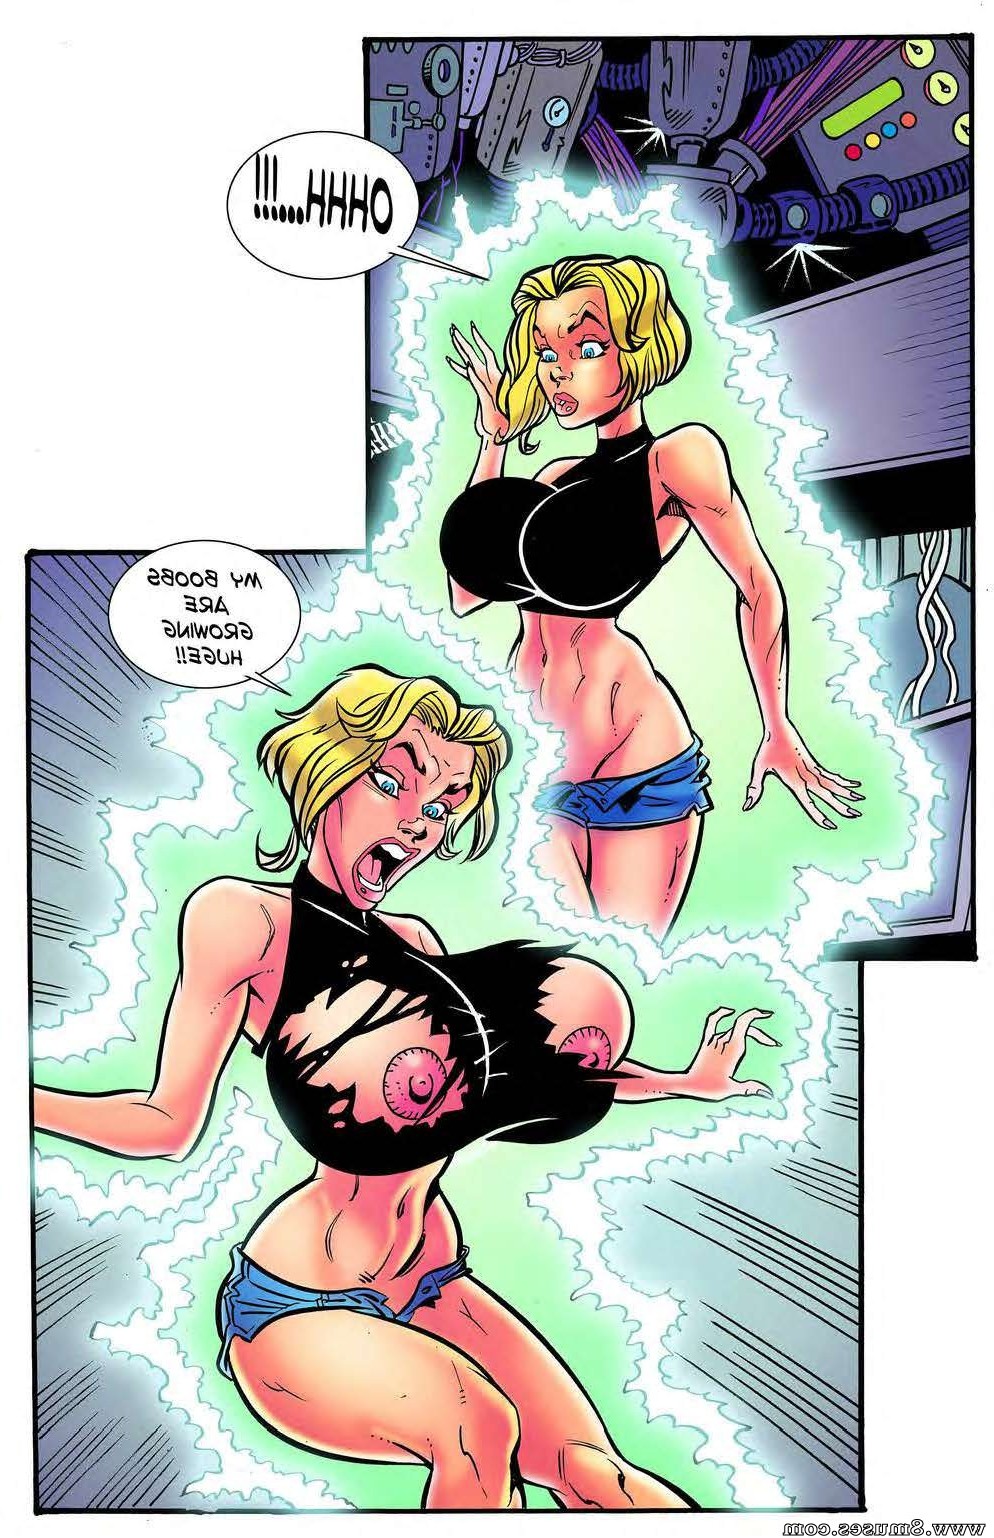 BE-Story-Club-Comics/Danger-Breast/Issue-5 Danger_Breast_-_Issue_5_7.jpg